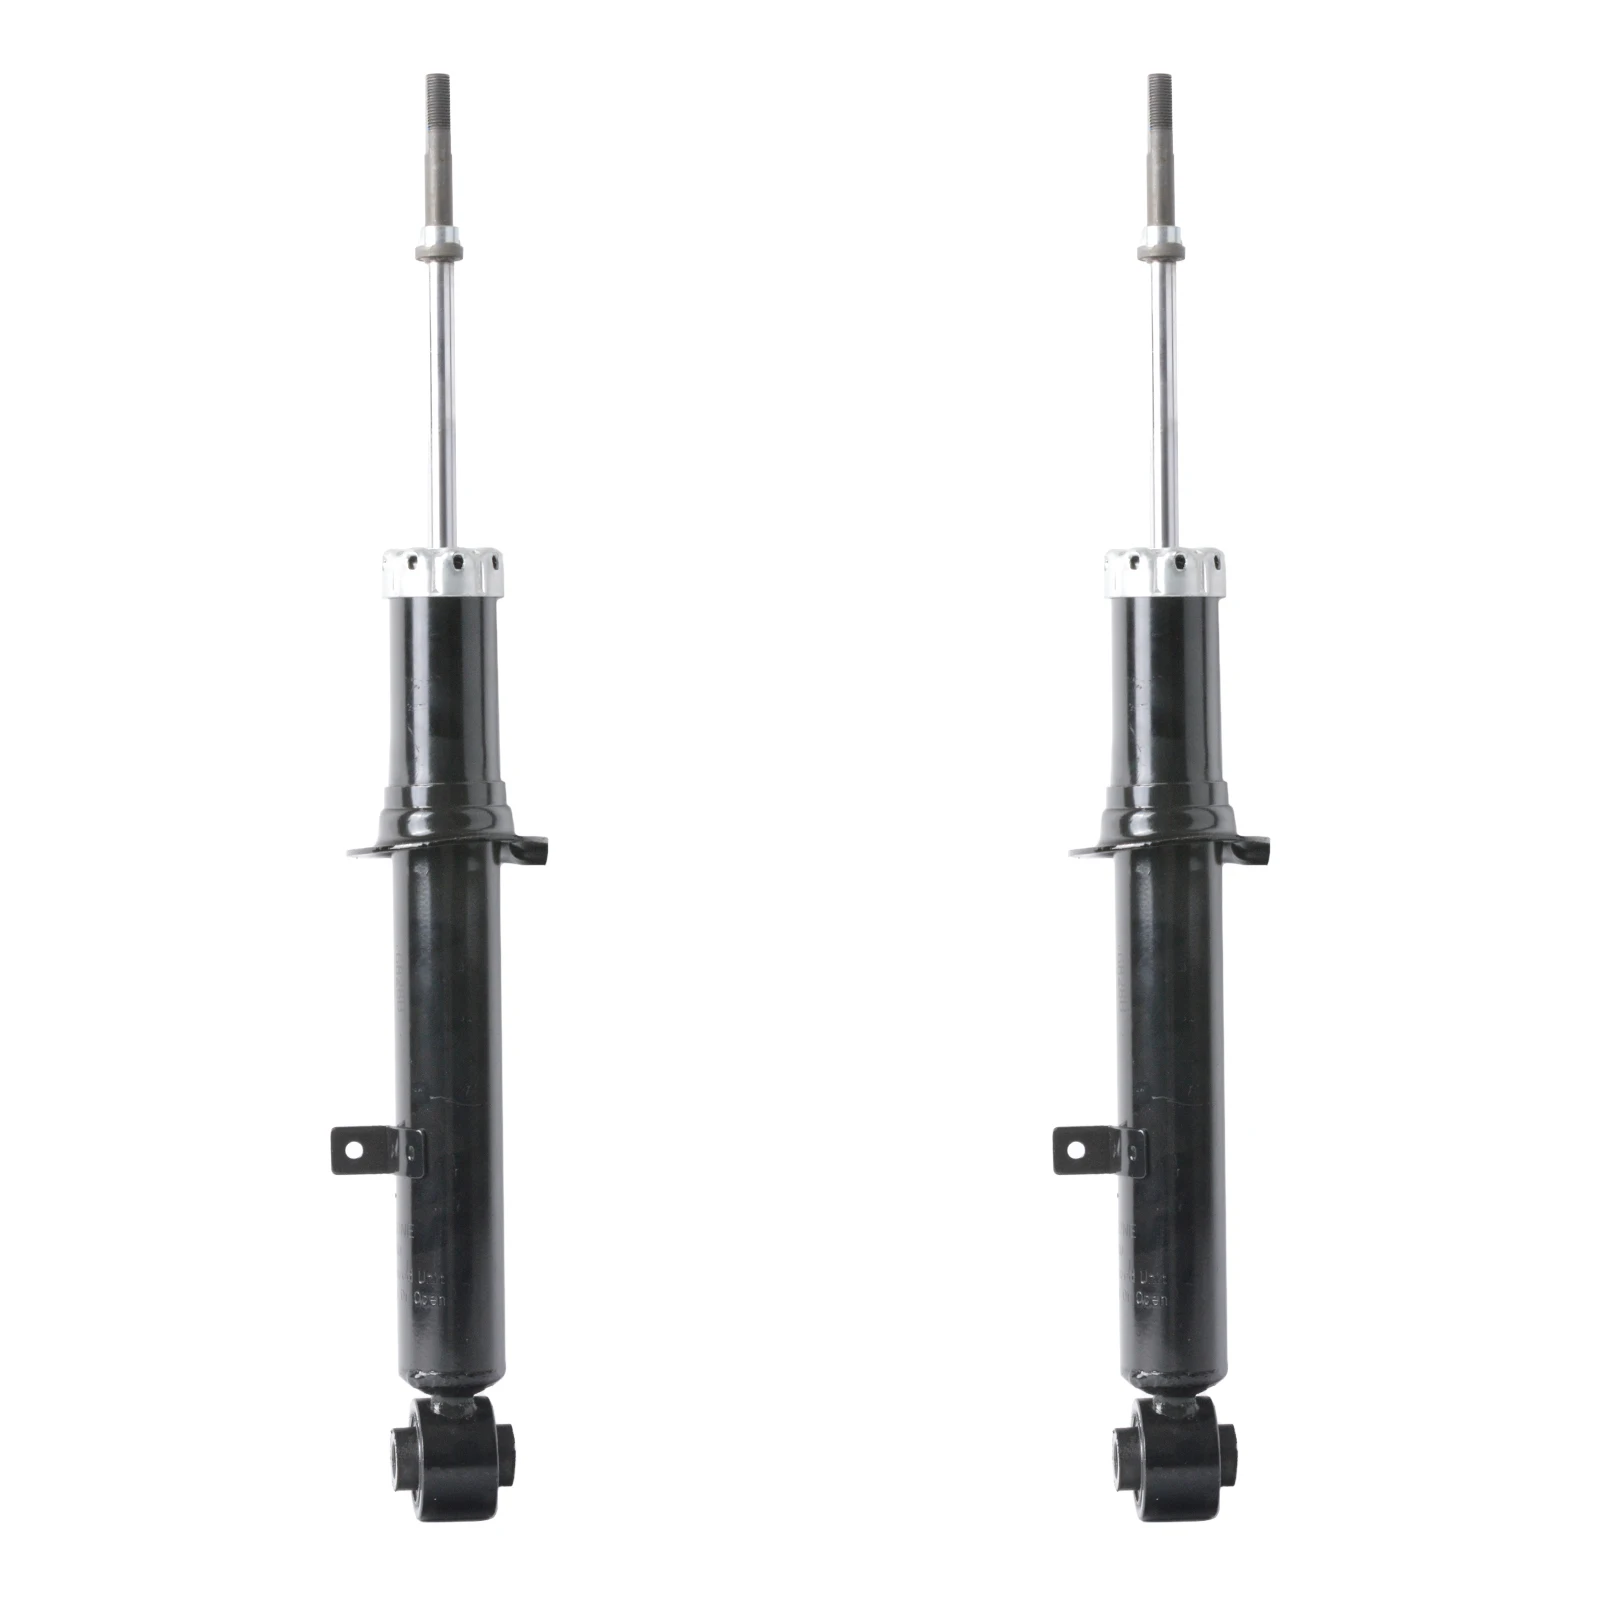 

Free Shipping to US Front shock absorber assembly for LEXUS-GS300/GS400/GS430 1998-2005 /1998-2000/2001-2005